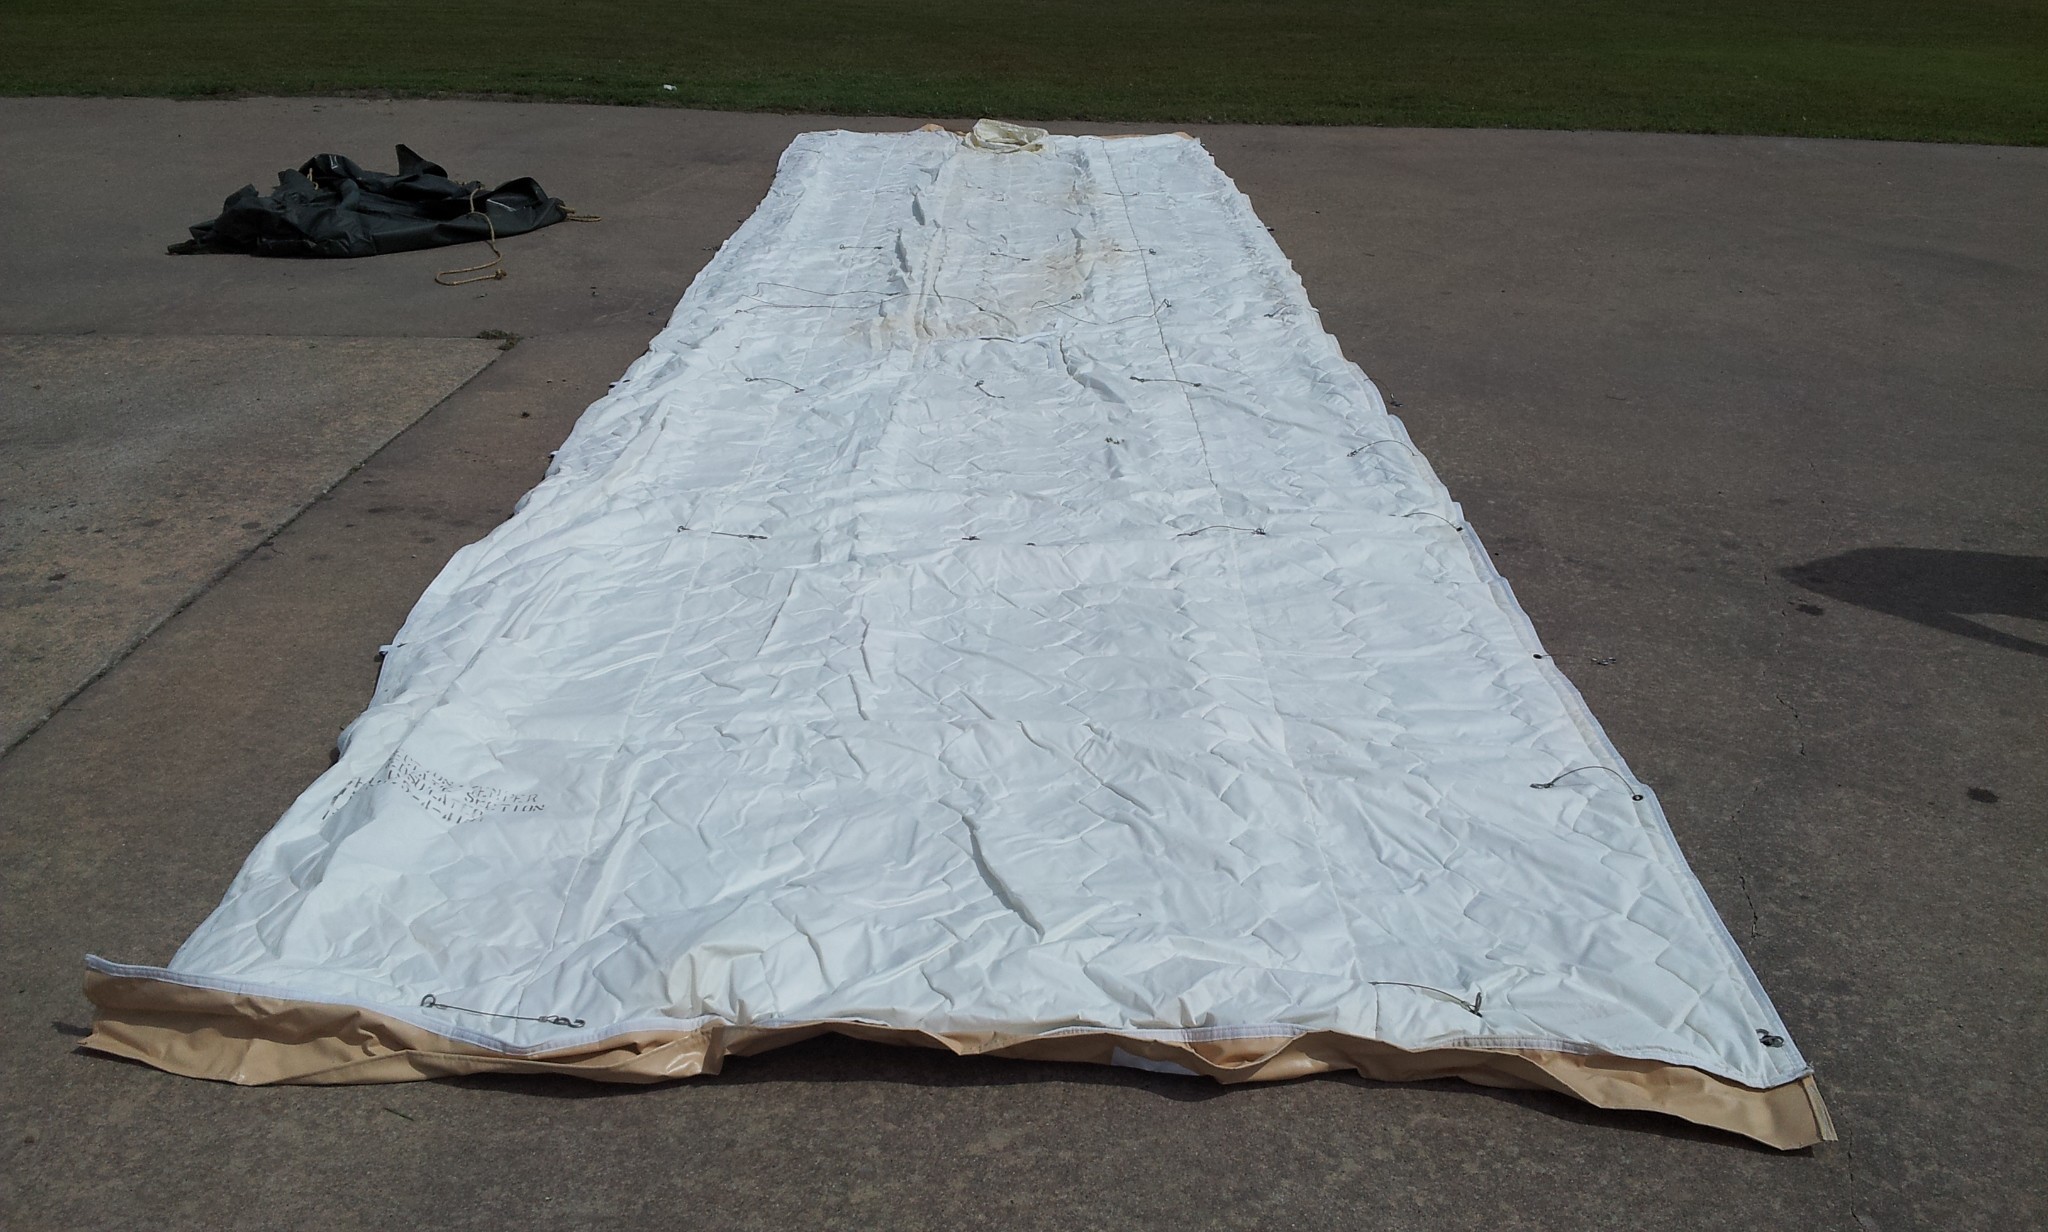 New Military Extendable Modular Tent Liner 8340-01-21109637